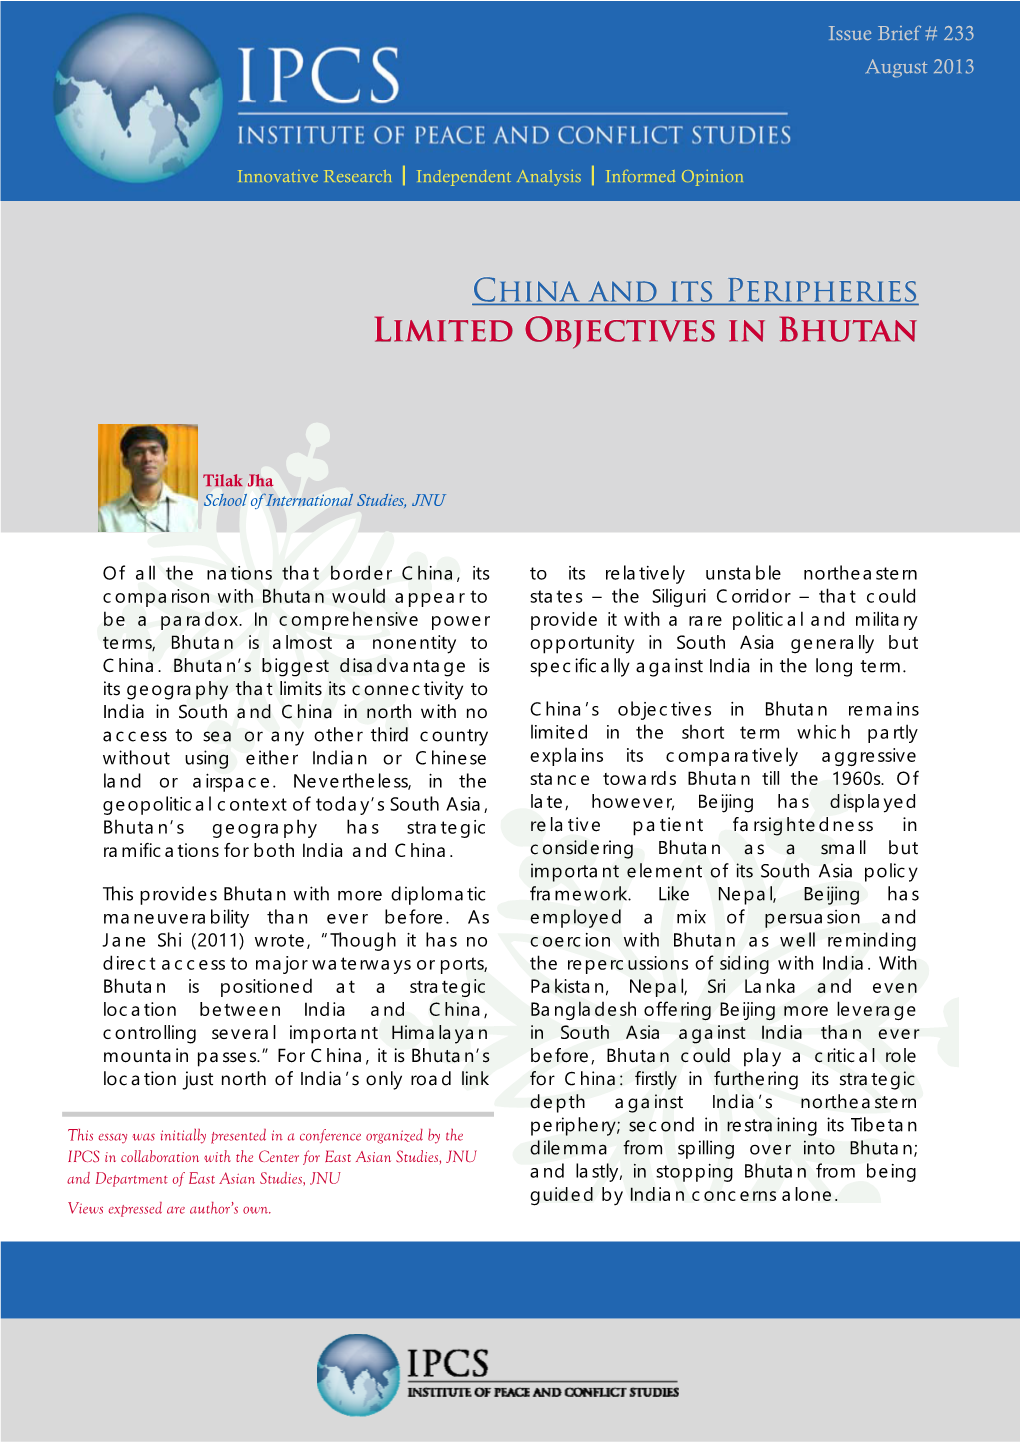 China and Its Peripheries: Limited Objectives in Bhutan